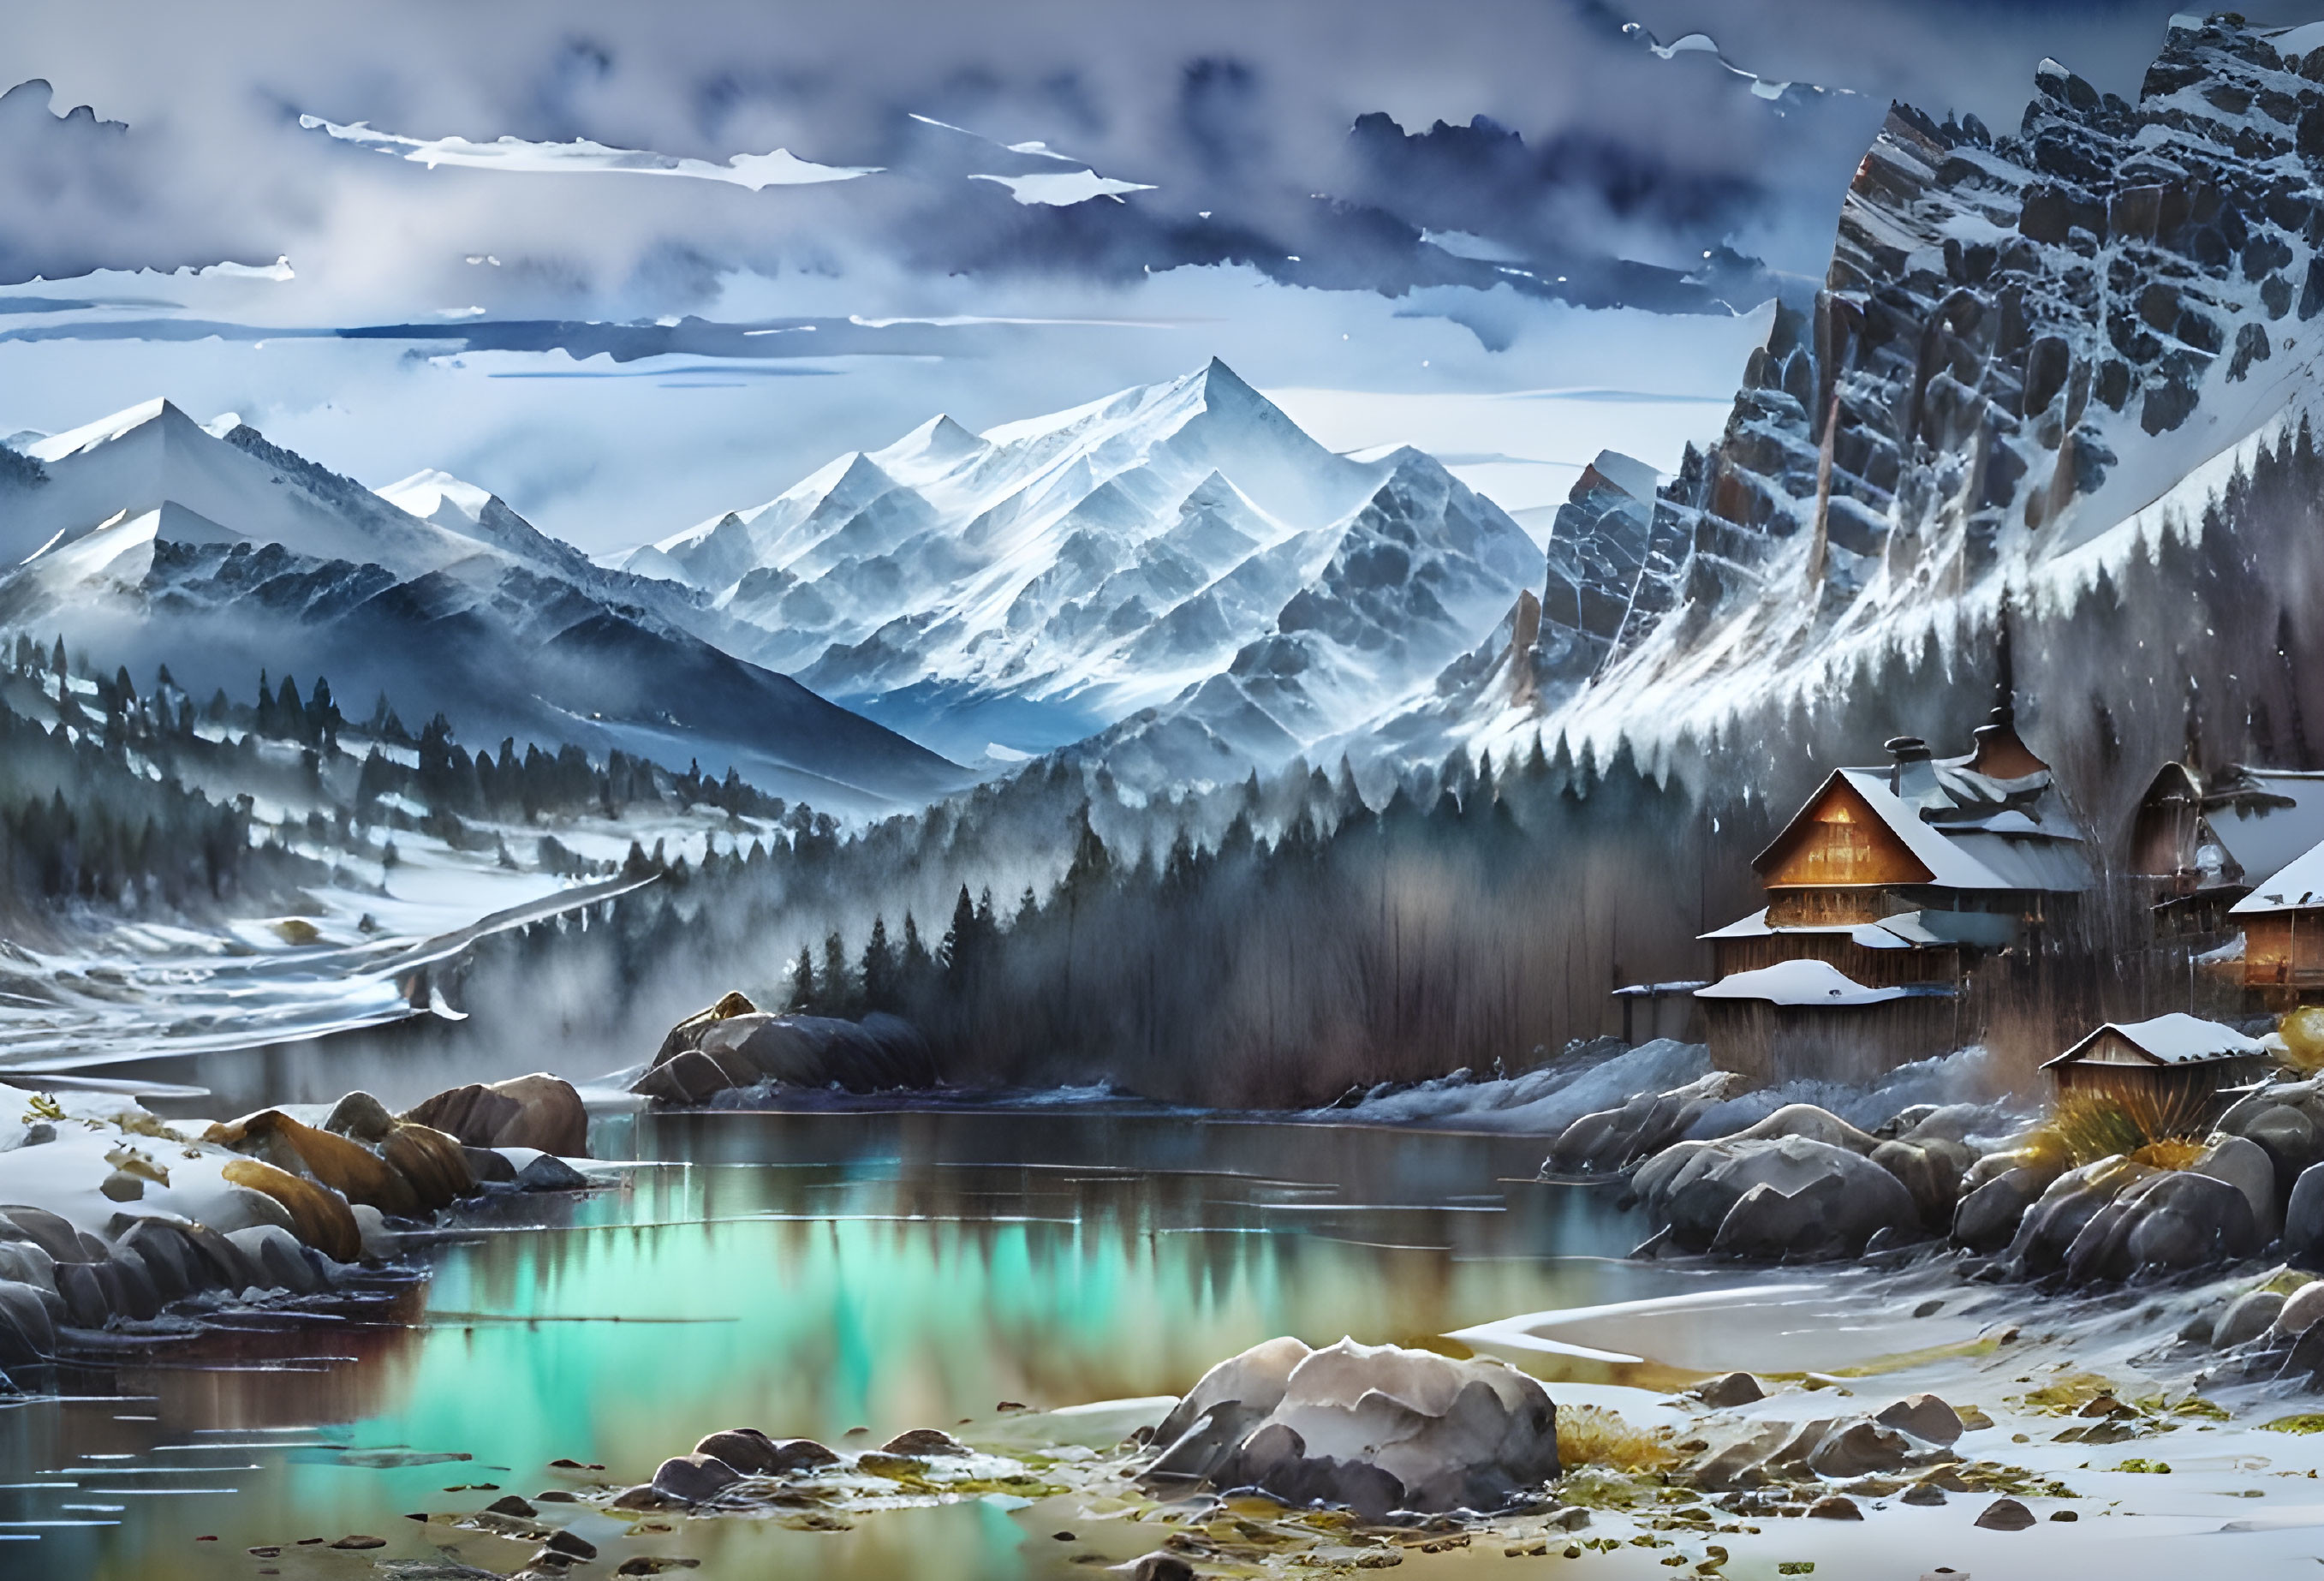 Tranquil Winter Landscape with Mountains, Lake, Snowy Trees, and Cottages